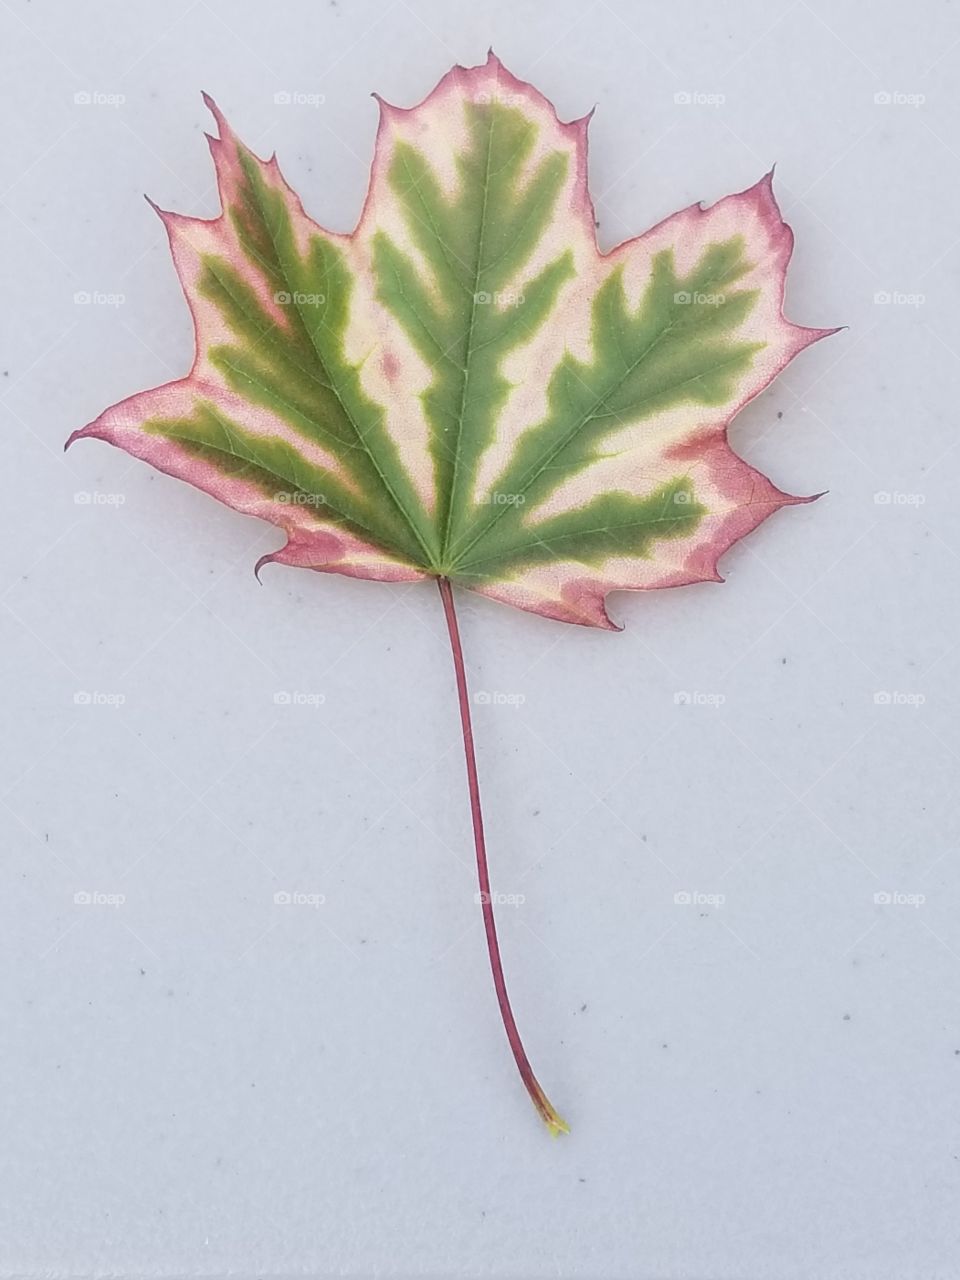 this is just a really cool looking leaf